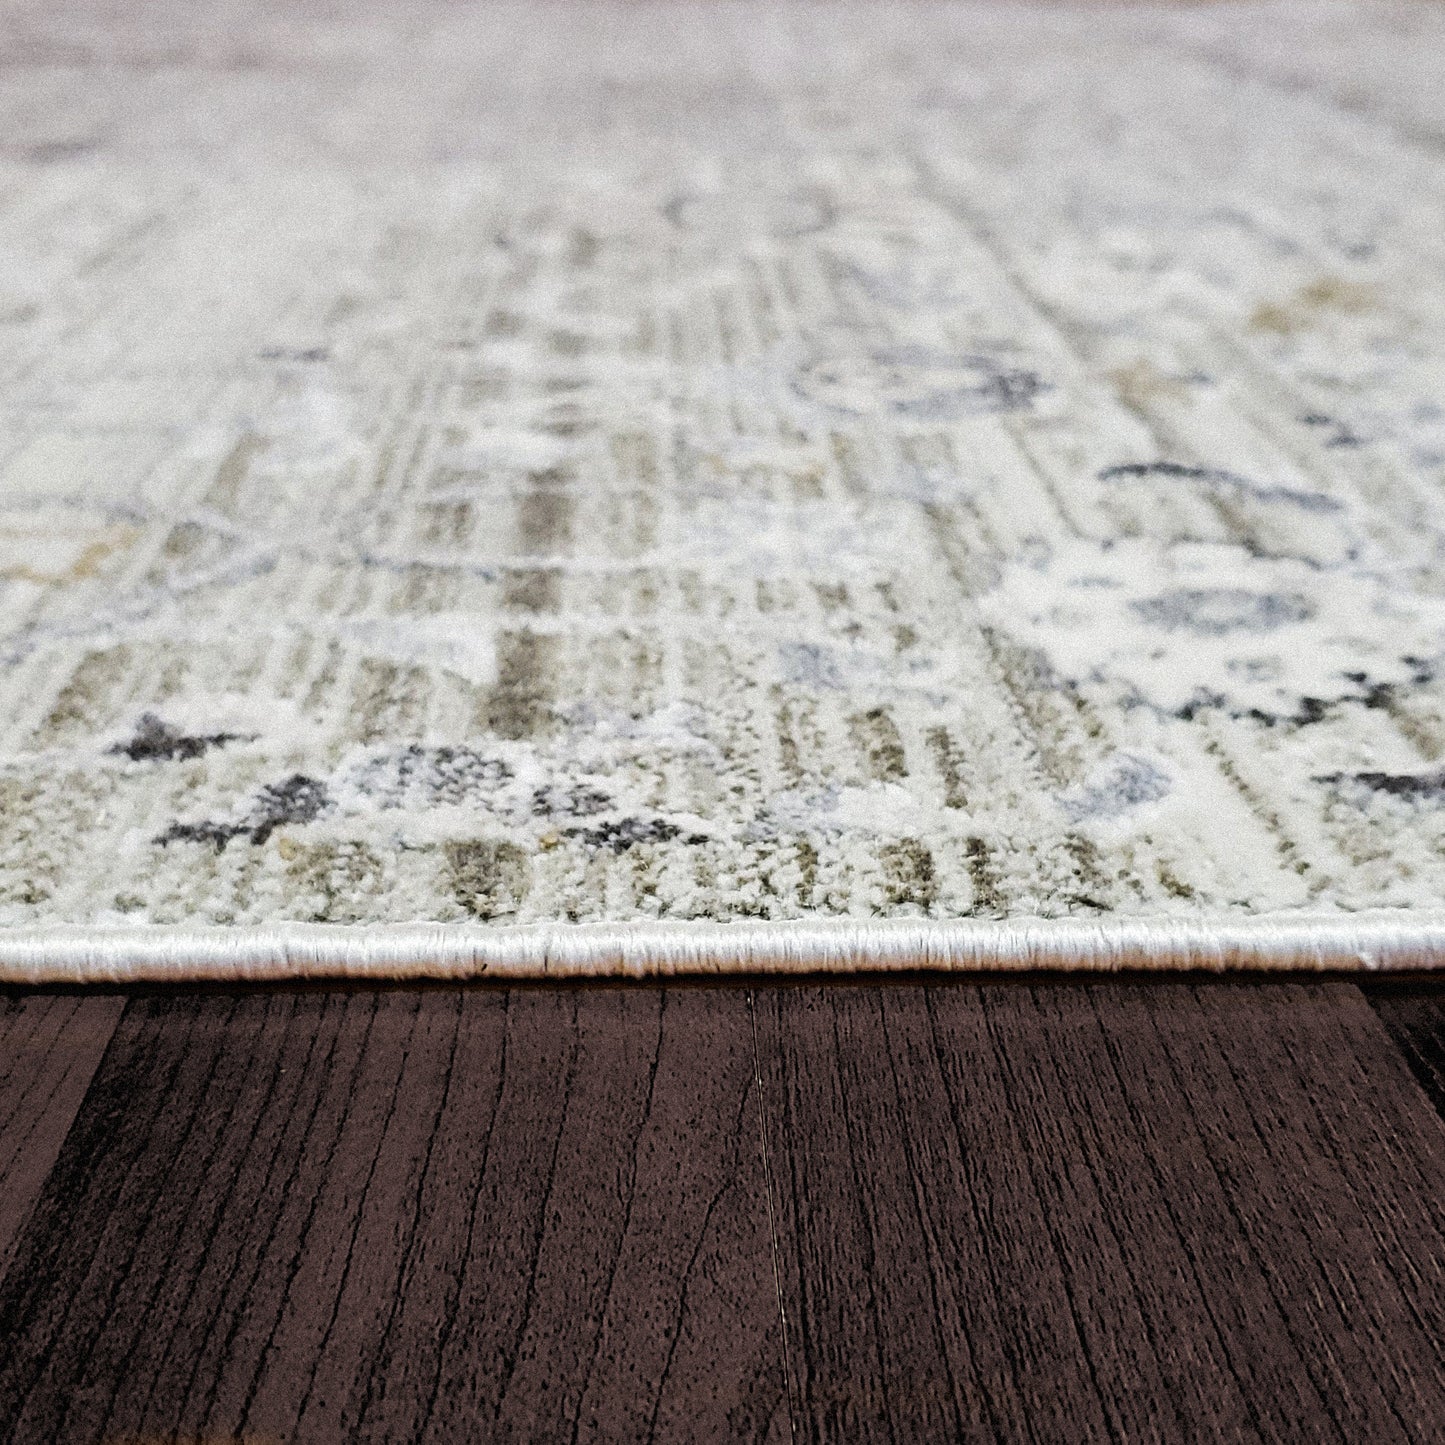 Dynamic Rugs REFINE 4635 Taupe/Silver/Gold Area Rug